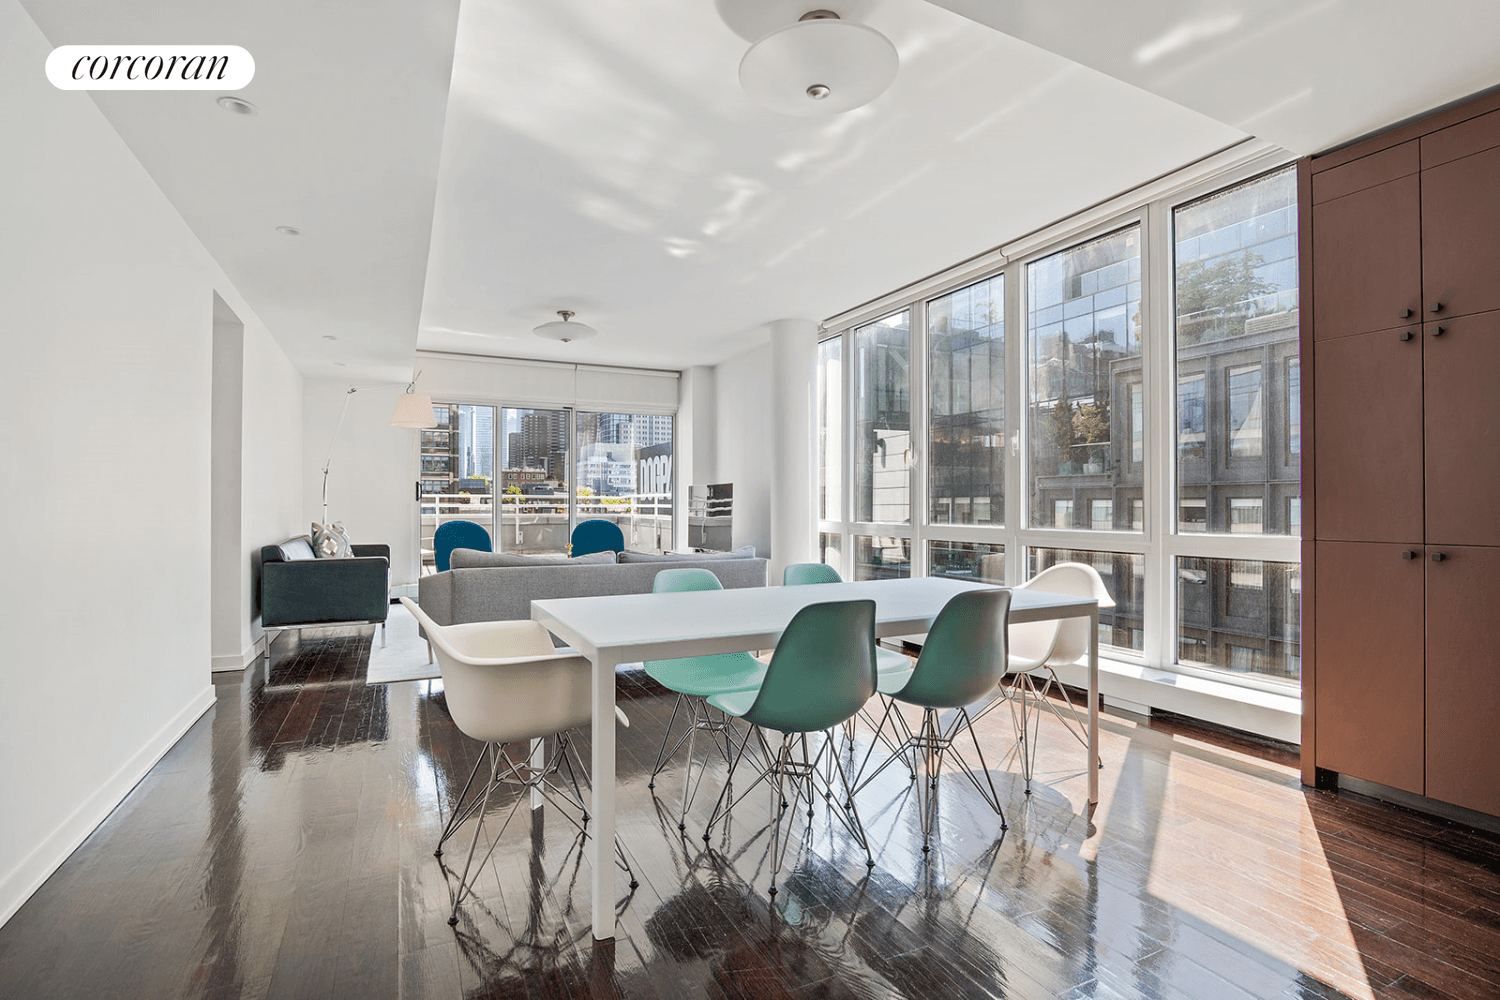 22 RENWICK STREET APT PH2 RENWICK MODERN HUDSON SQUAREFURNISHED 2 TERRACES PRIVATE ENTRANCE W D AMAZING VIEWSThis is a tremendous opportunity to lease available up to 11 months lease term ...